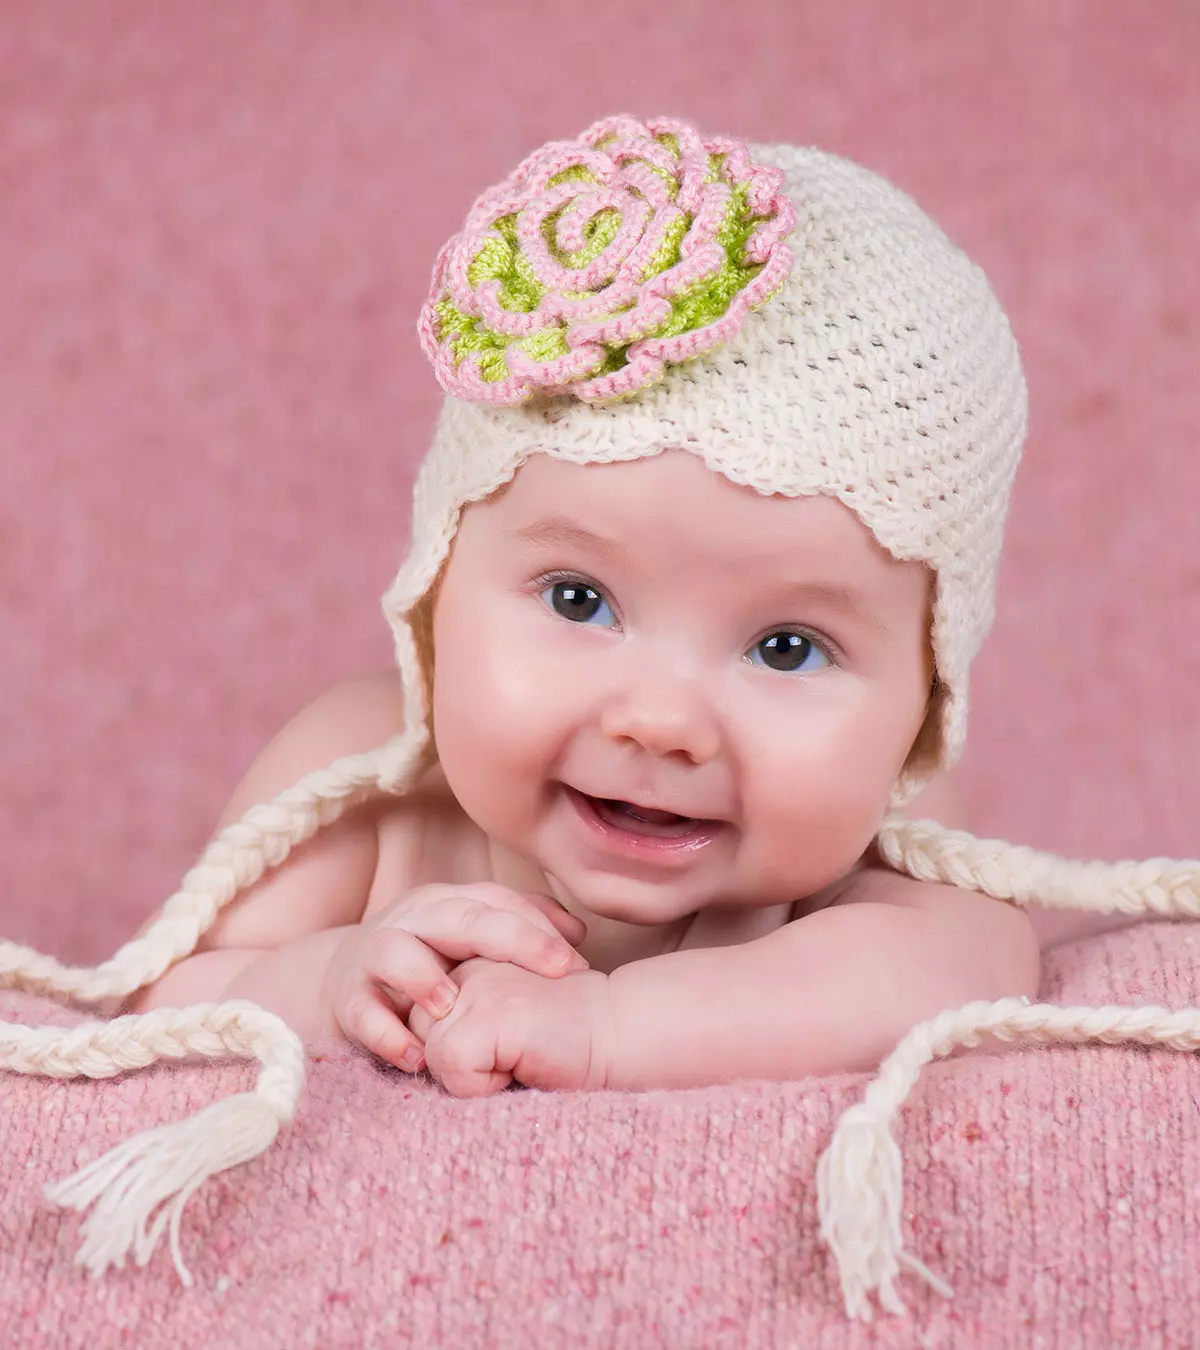 53-Ultimate-Baby-Names-That-Mean-New-Beginning-And-Rebirth